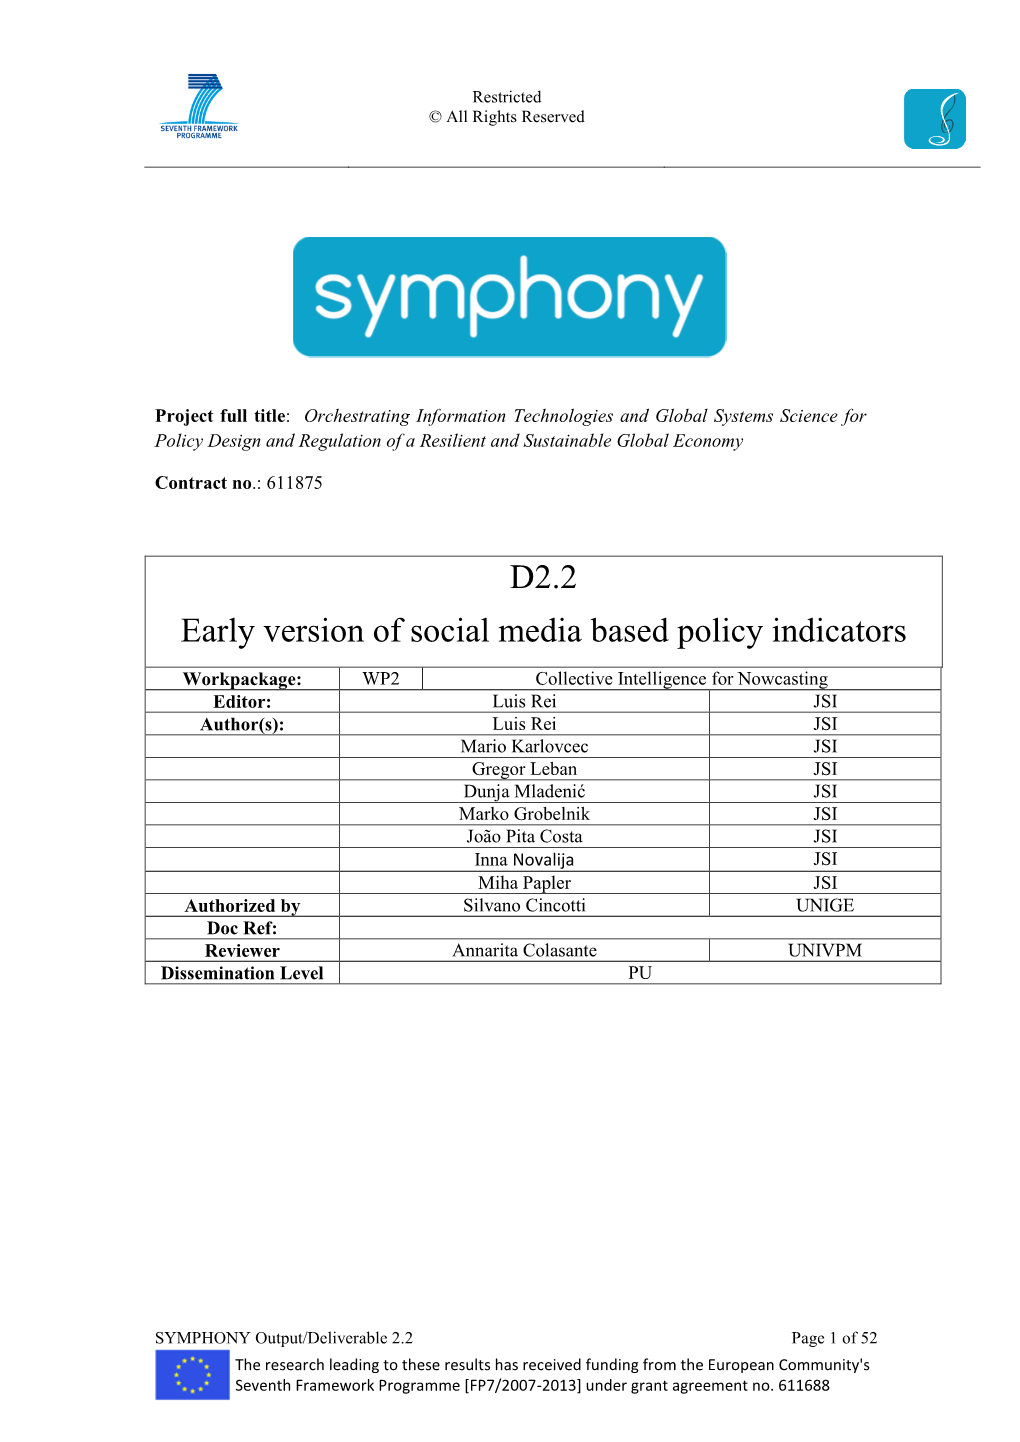 D2.2 Early Version of Social Media Based Policy Indicators